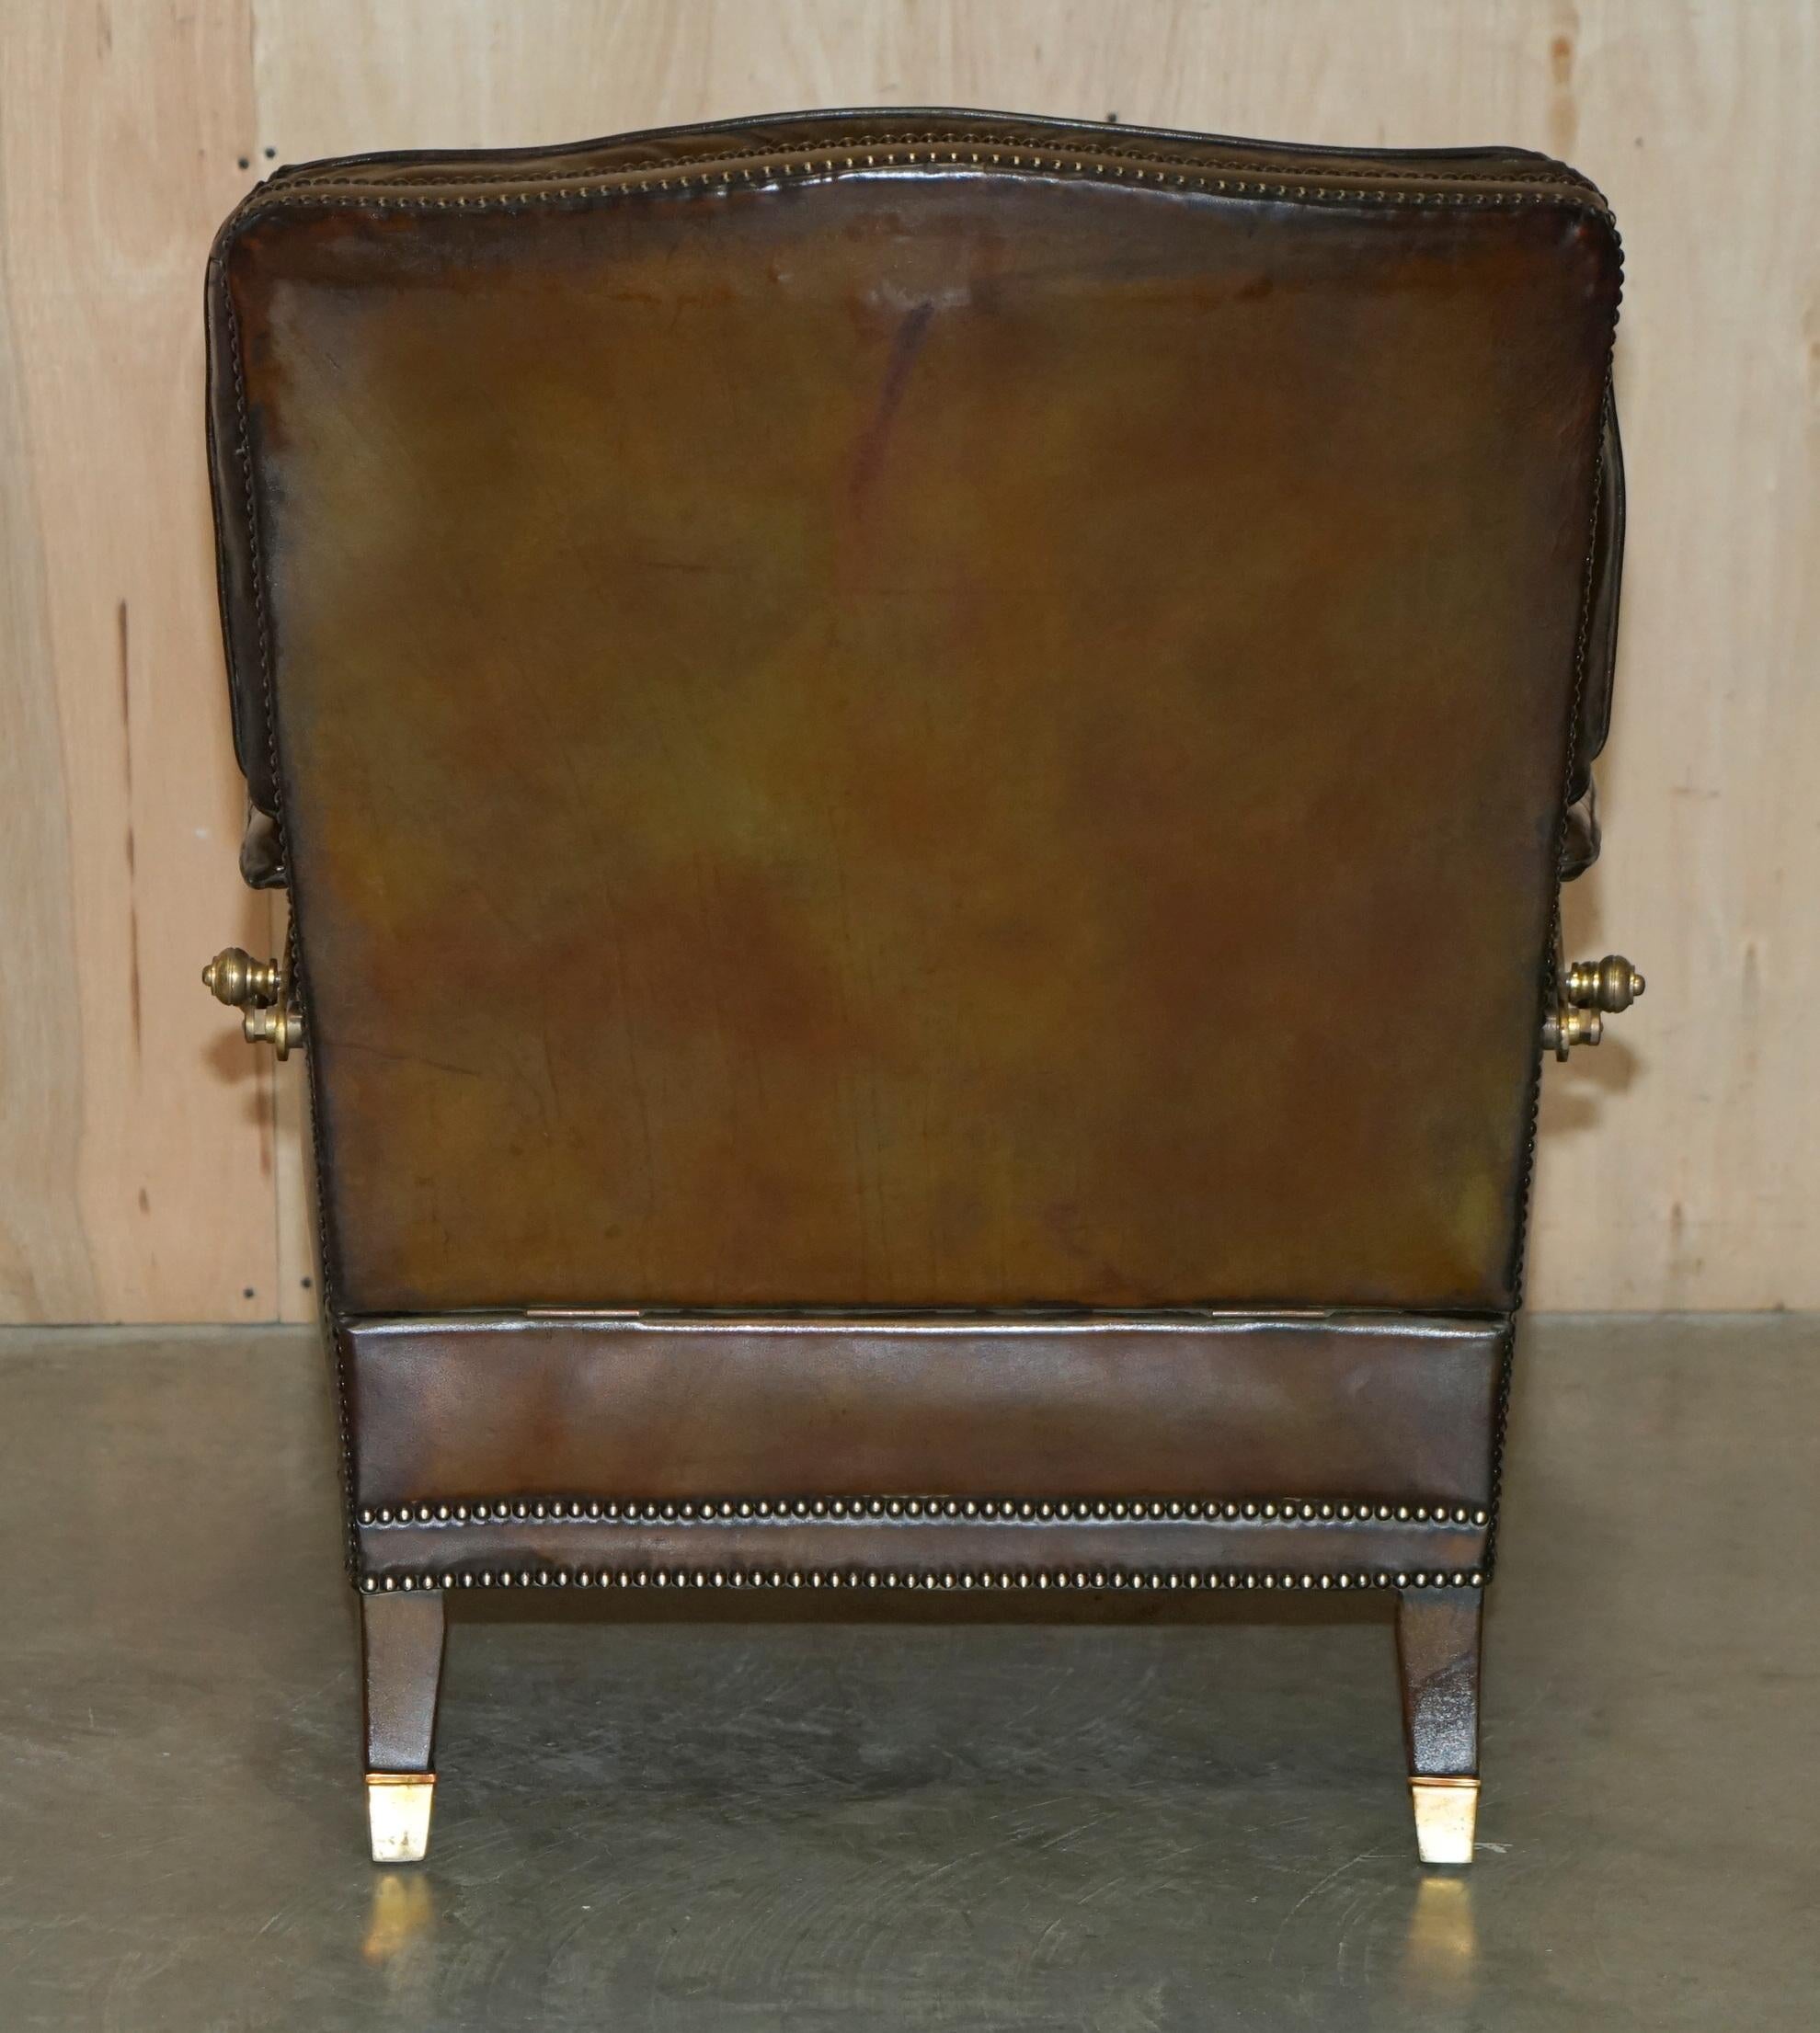 RESTORED CONTINENTAL HAND DYED BROWN LEATHER LiBRARY RECLINER ARMCHAIR & OTTOMAN 5